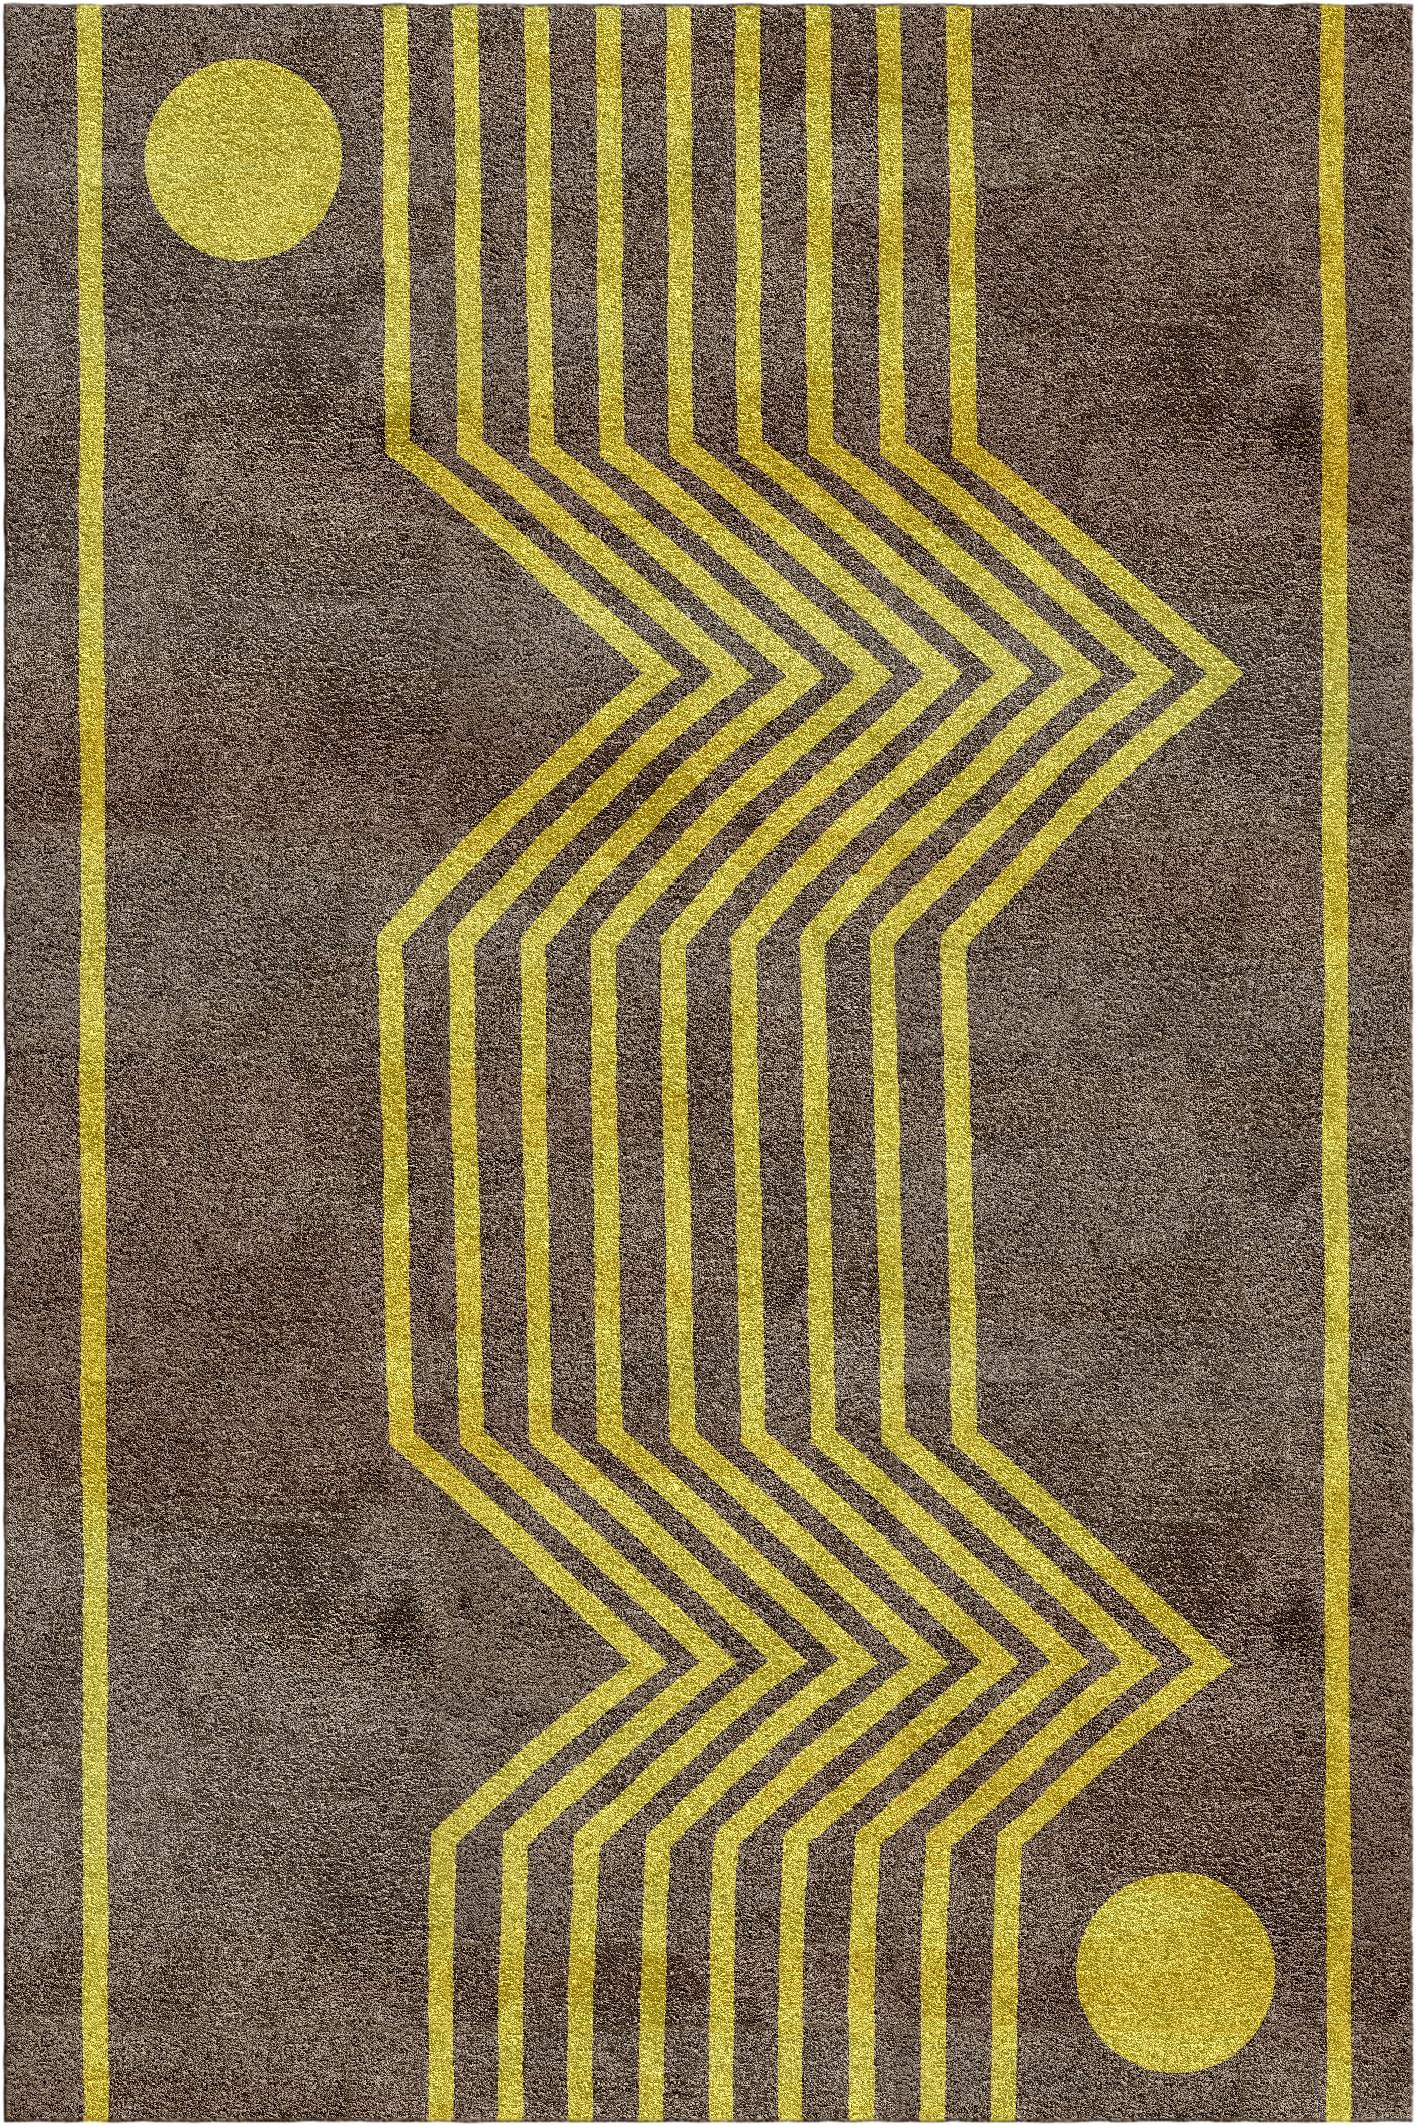 Futuro rug V by Vanessa Ordoñez
Dimensions: D 300 x W 200 x H 1.5 cm
Materials: bamboo fibers and linen

A striking design by Vanessa Ordoñez, this gorgeous rug will add sophistication and allure in any contemporary home. Hand-tufted in Europe